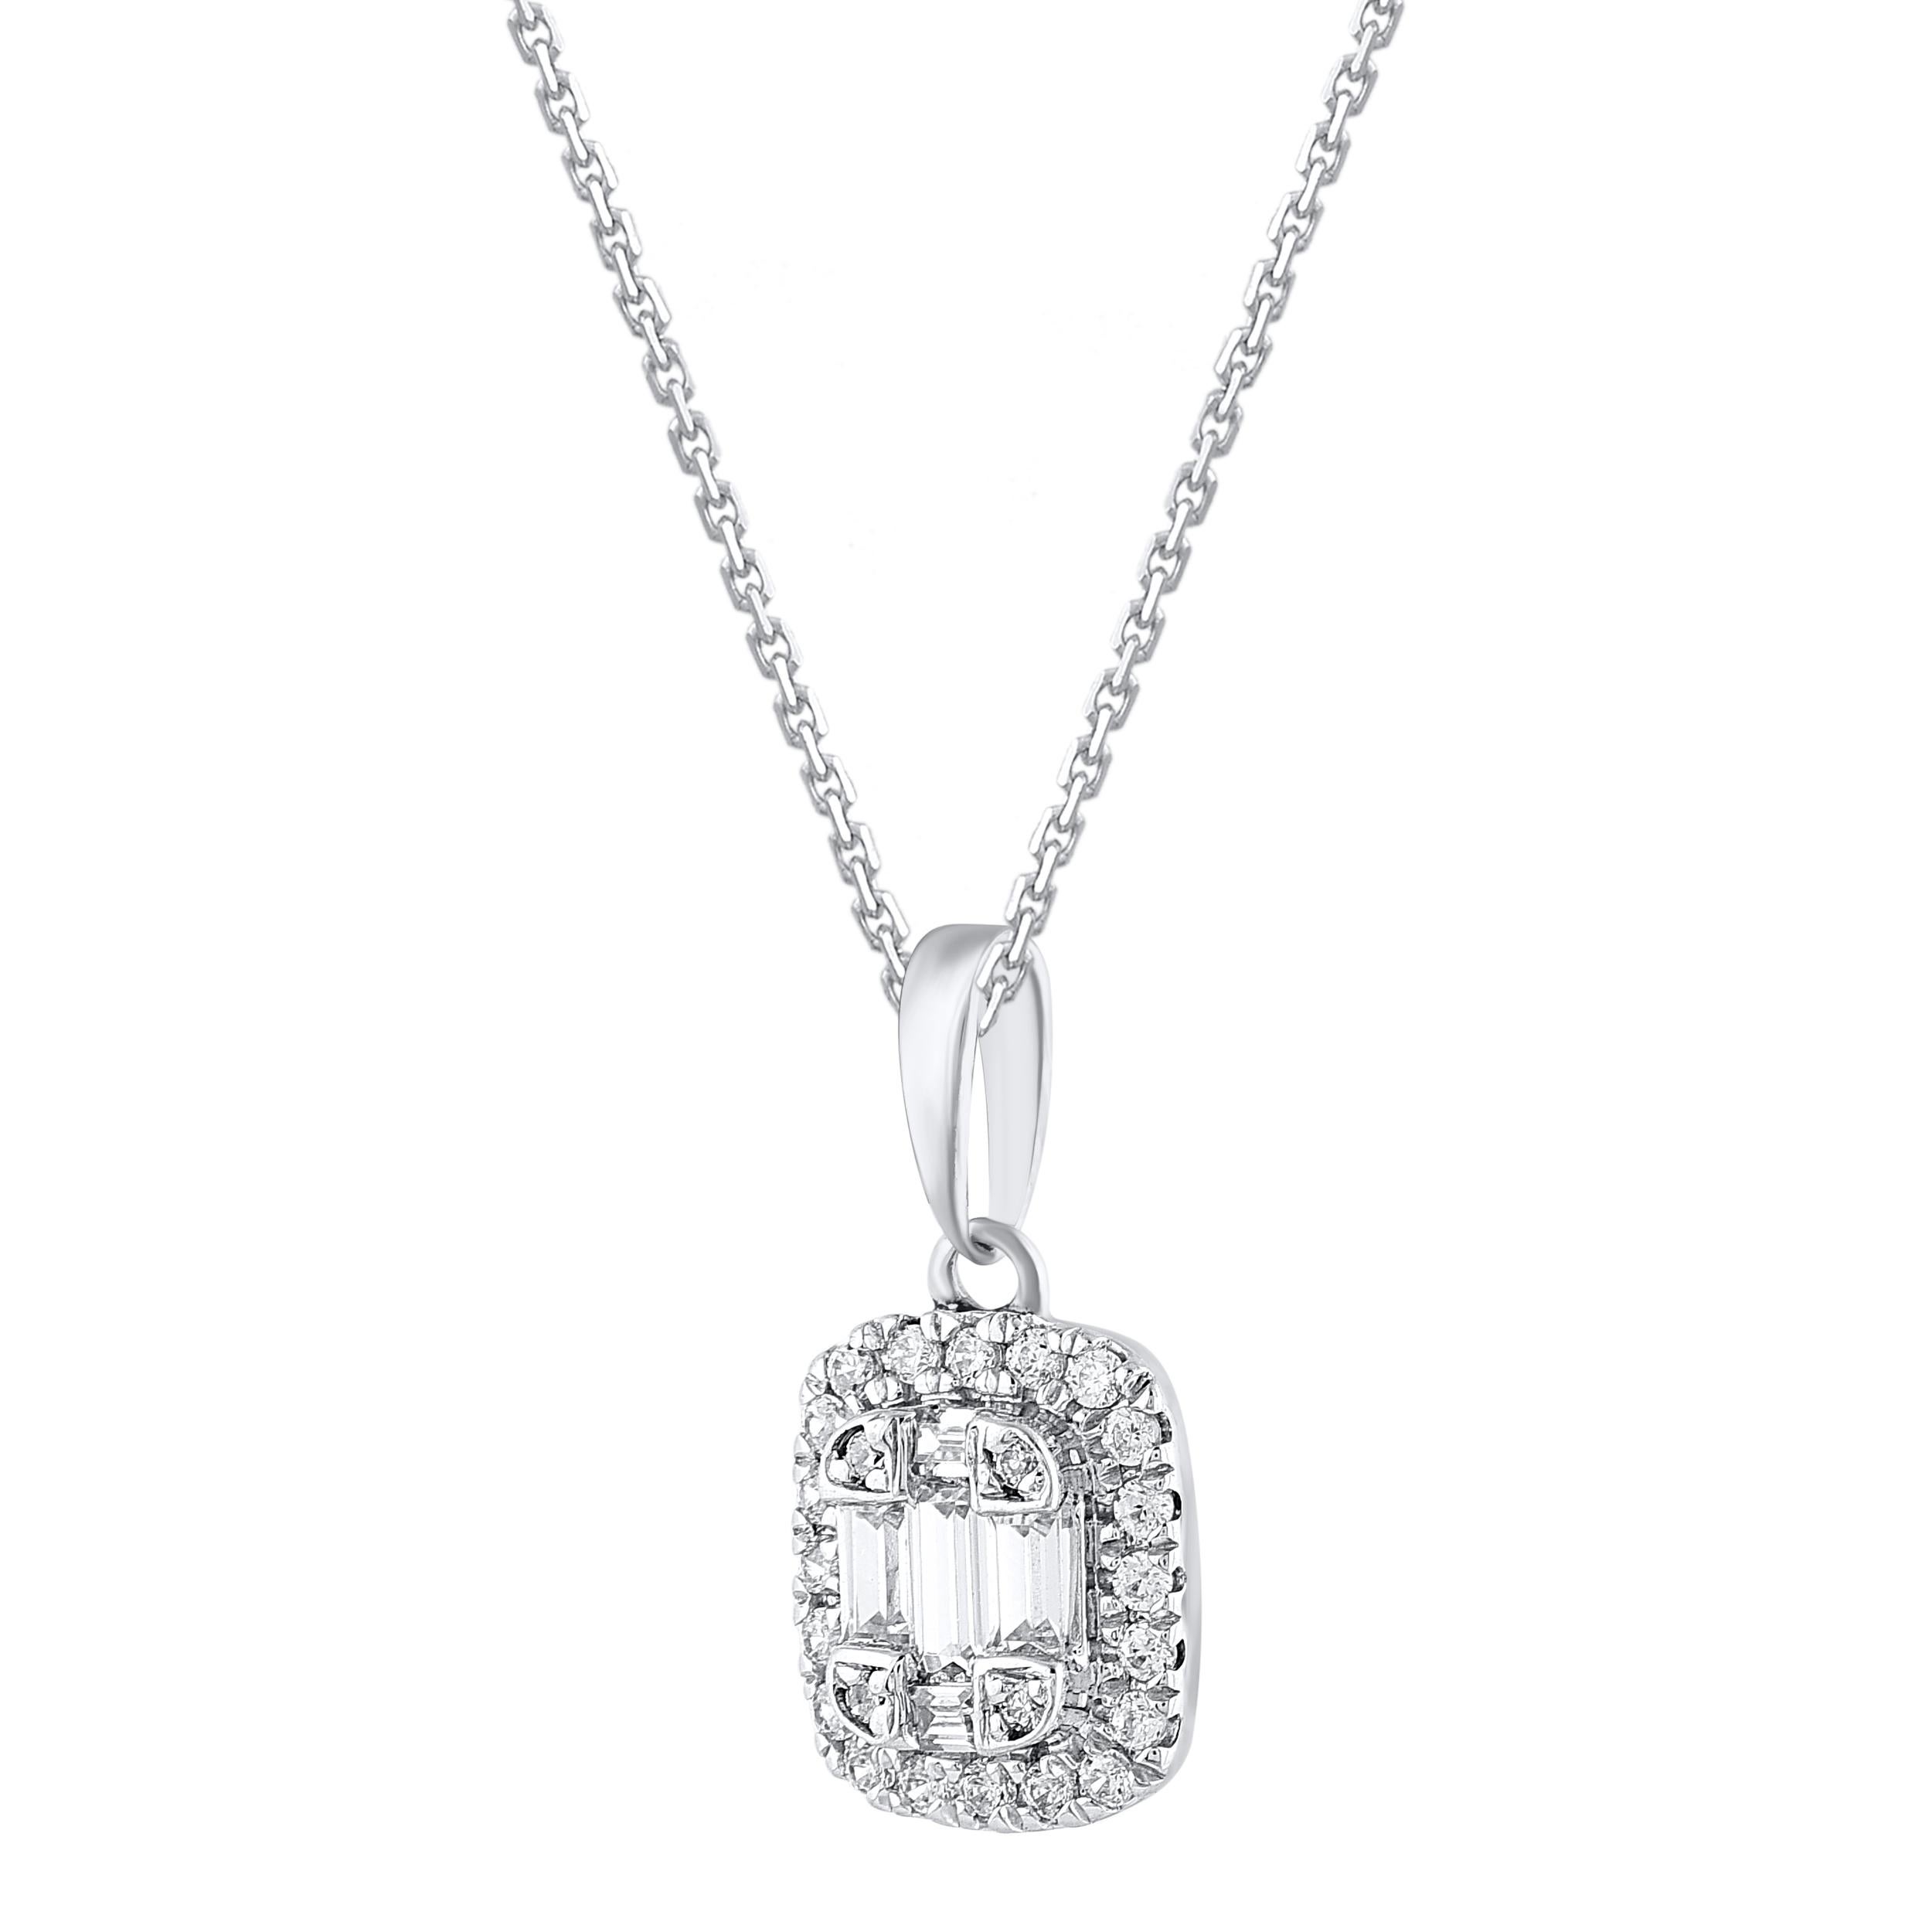 This beautiful cushion pendant necklace is studded with 29 single cut and baguette cut natural diamonds in prong and channel setting. The total diamond weight of these pendant is 0.20 carats. All the diamonds are H-I color, I-2 clarity. This white